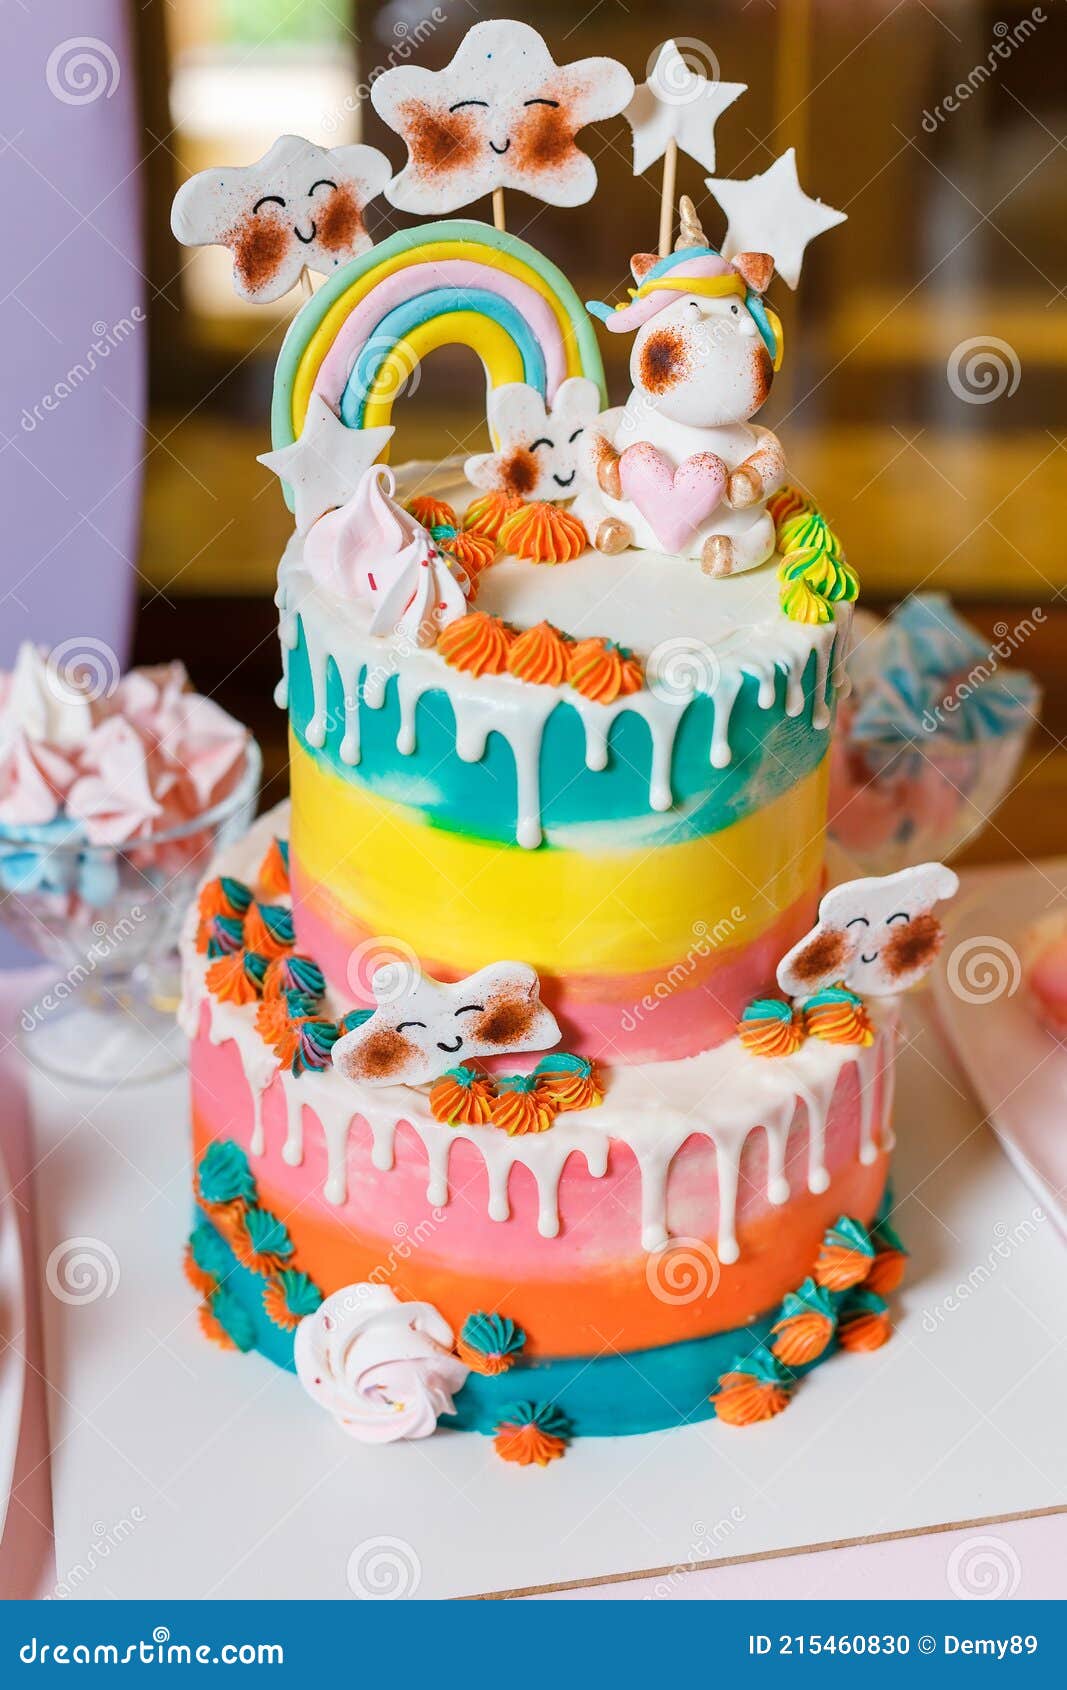 Big Cake on the Unicorn and Rainbow Theme. Sweets for Children ...